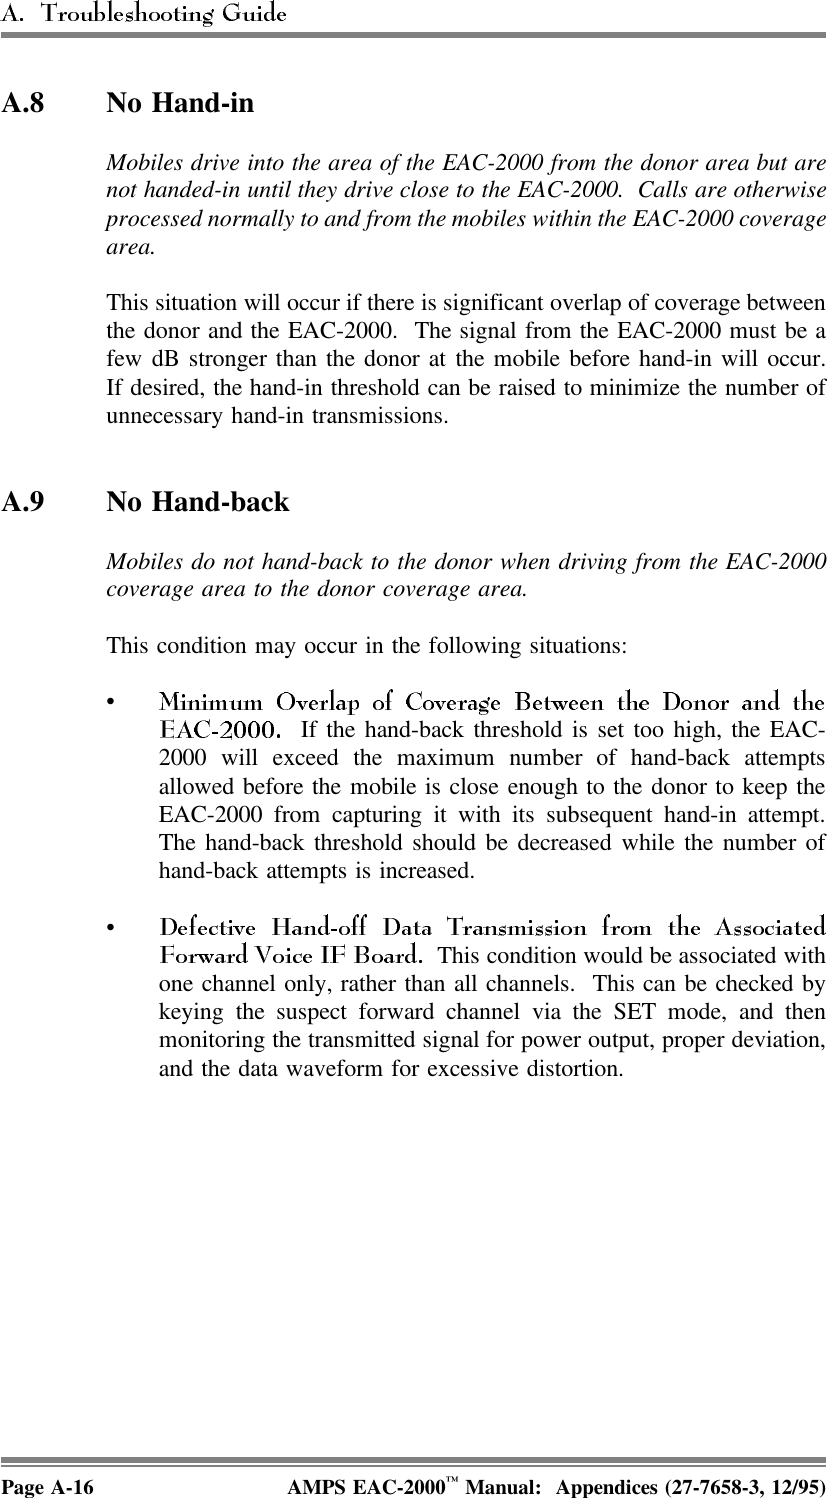 A.8 No Hand-in Mobiles drive into the area of the EAC-2000 from the donor area but arenot handed-in until they drive close to the EAC-2000.  Calls are otherwiseprocessed normally to and from the mobiles within the EAC-2000 coveragearea.This situation will occur if there is significant overlap of coverage betweenthe donor and the EAC-2000.  The signal from the EAC-2000 must be afew dB stronger than the donor at the mobile before hand-in will occur.If desired, the hand-in threshold can be raised to minimize the number ofunnecessary hand-in transmissions.A.9 No Hand-back Mobiles do not hand-back to the donor when driving from the EAC-2000coverage area to the donor coverage area.This condition may occur in the following situations:•  If the hand-back threshold is set too high, the EAC-2000 will exceed the maximum number of hand-back attemptsallowed before the mobile is close enough to the donor to keep theEAC-2000 from capturing it with its subsequent hand-in attempt.The hand-back threshold should be decreased while the number ofhand-back attempts is increased.•  This condition would be associated withone channel only, rather than all channels.  This can be checked bykeying the suspect forward channel via the SET mode, and thenmonitoring the transmitted signal for power output, proper deviation,and the data waveform for excessive distortion.Page A-16 AMPS EAC-2000™ Manual:  Appendices (27-7658-3, 12/95)